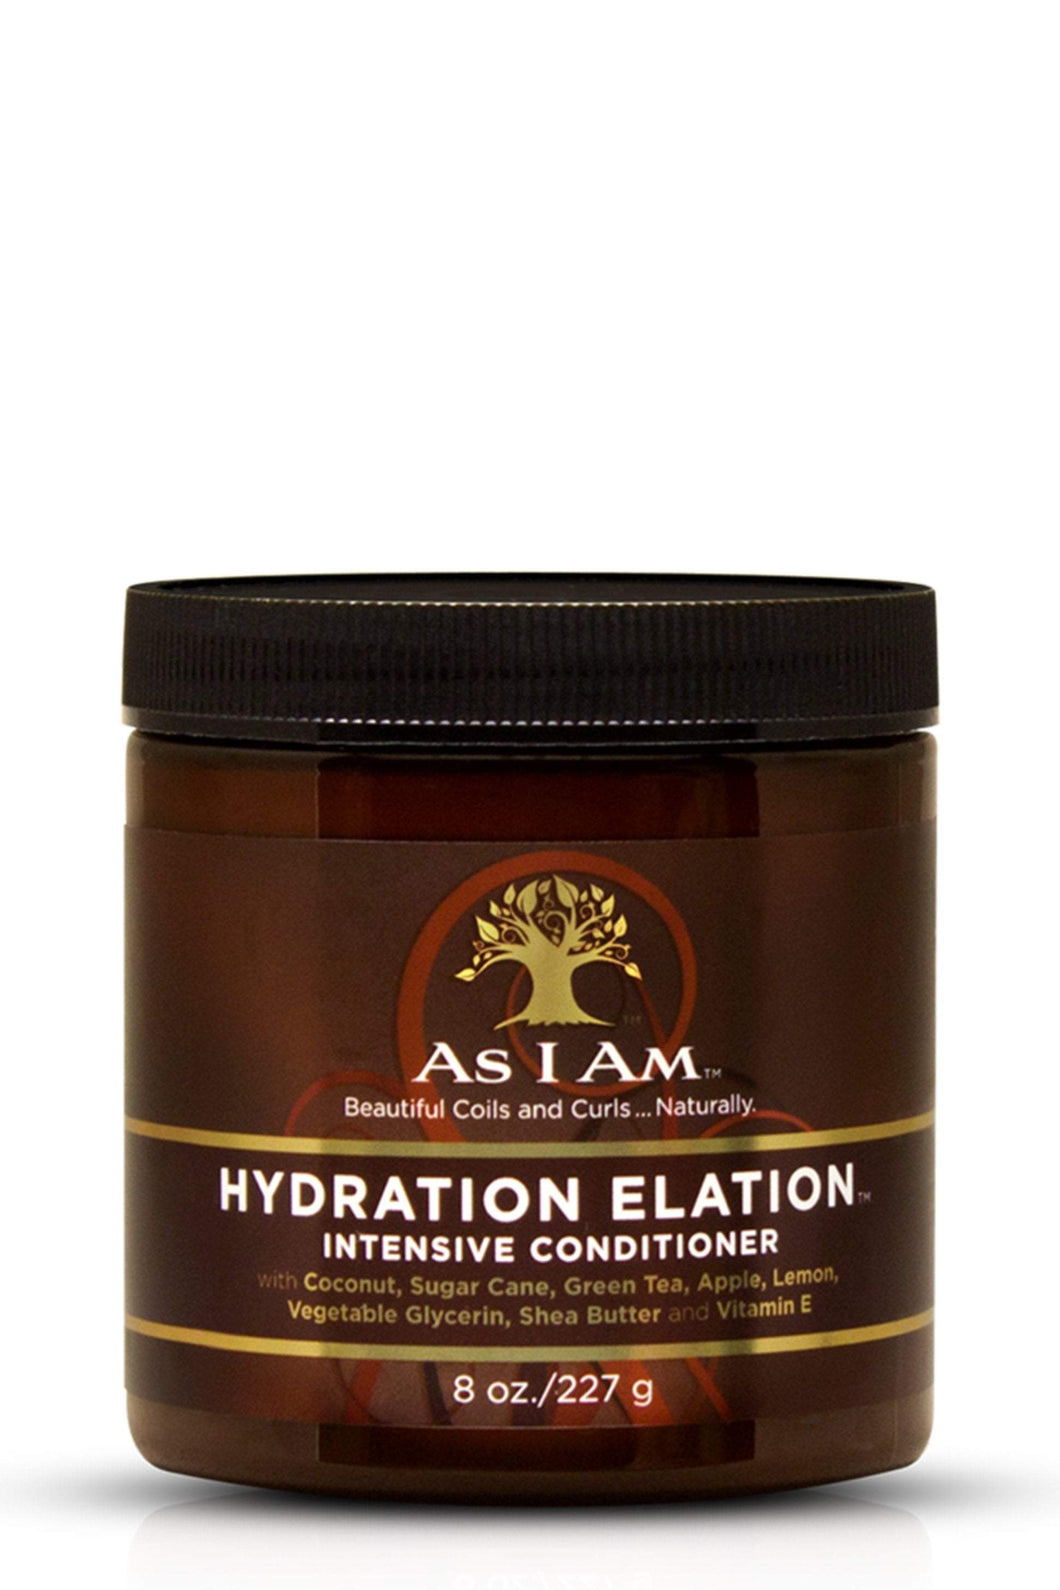 AS I AM Hydration Elation Intensive Conditioner Product